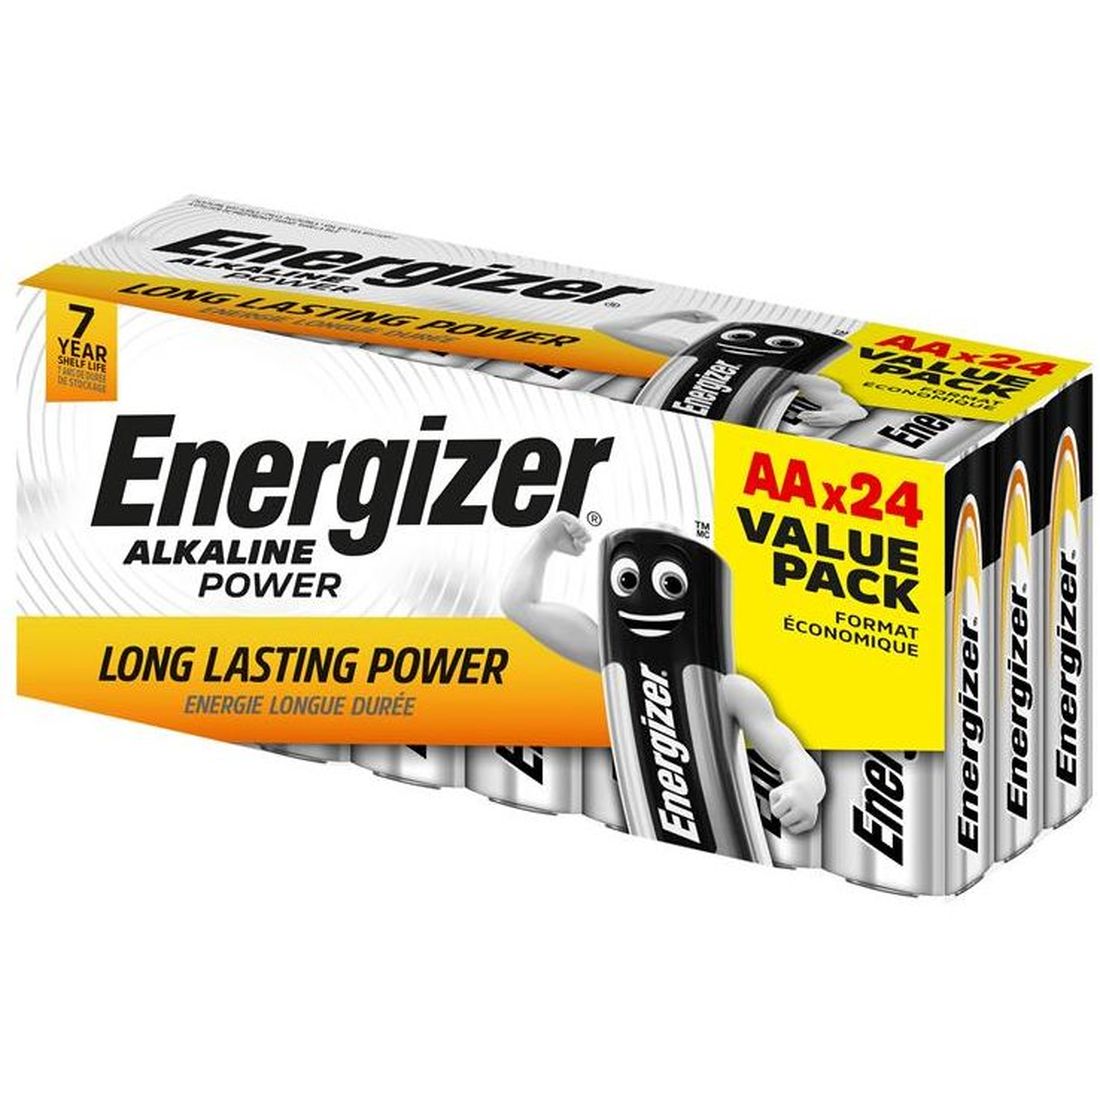 Energizer AA Cell Alkaline Power Batteries (Pack 24)                                      